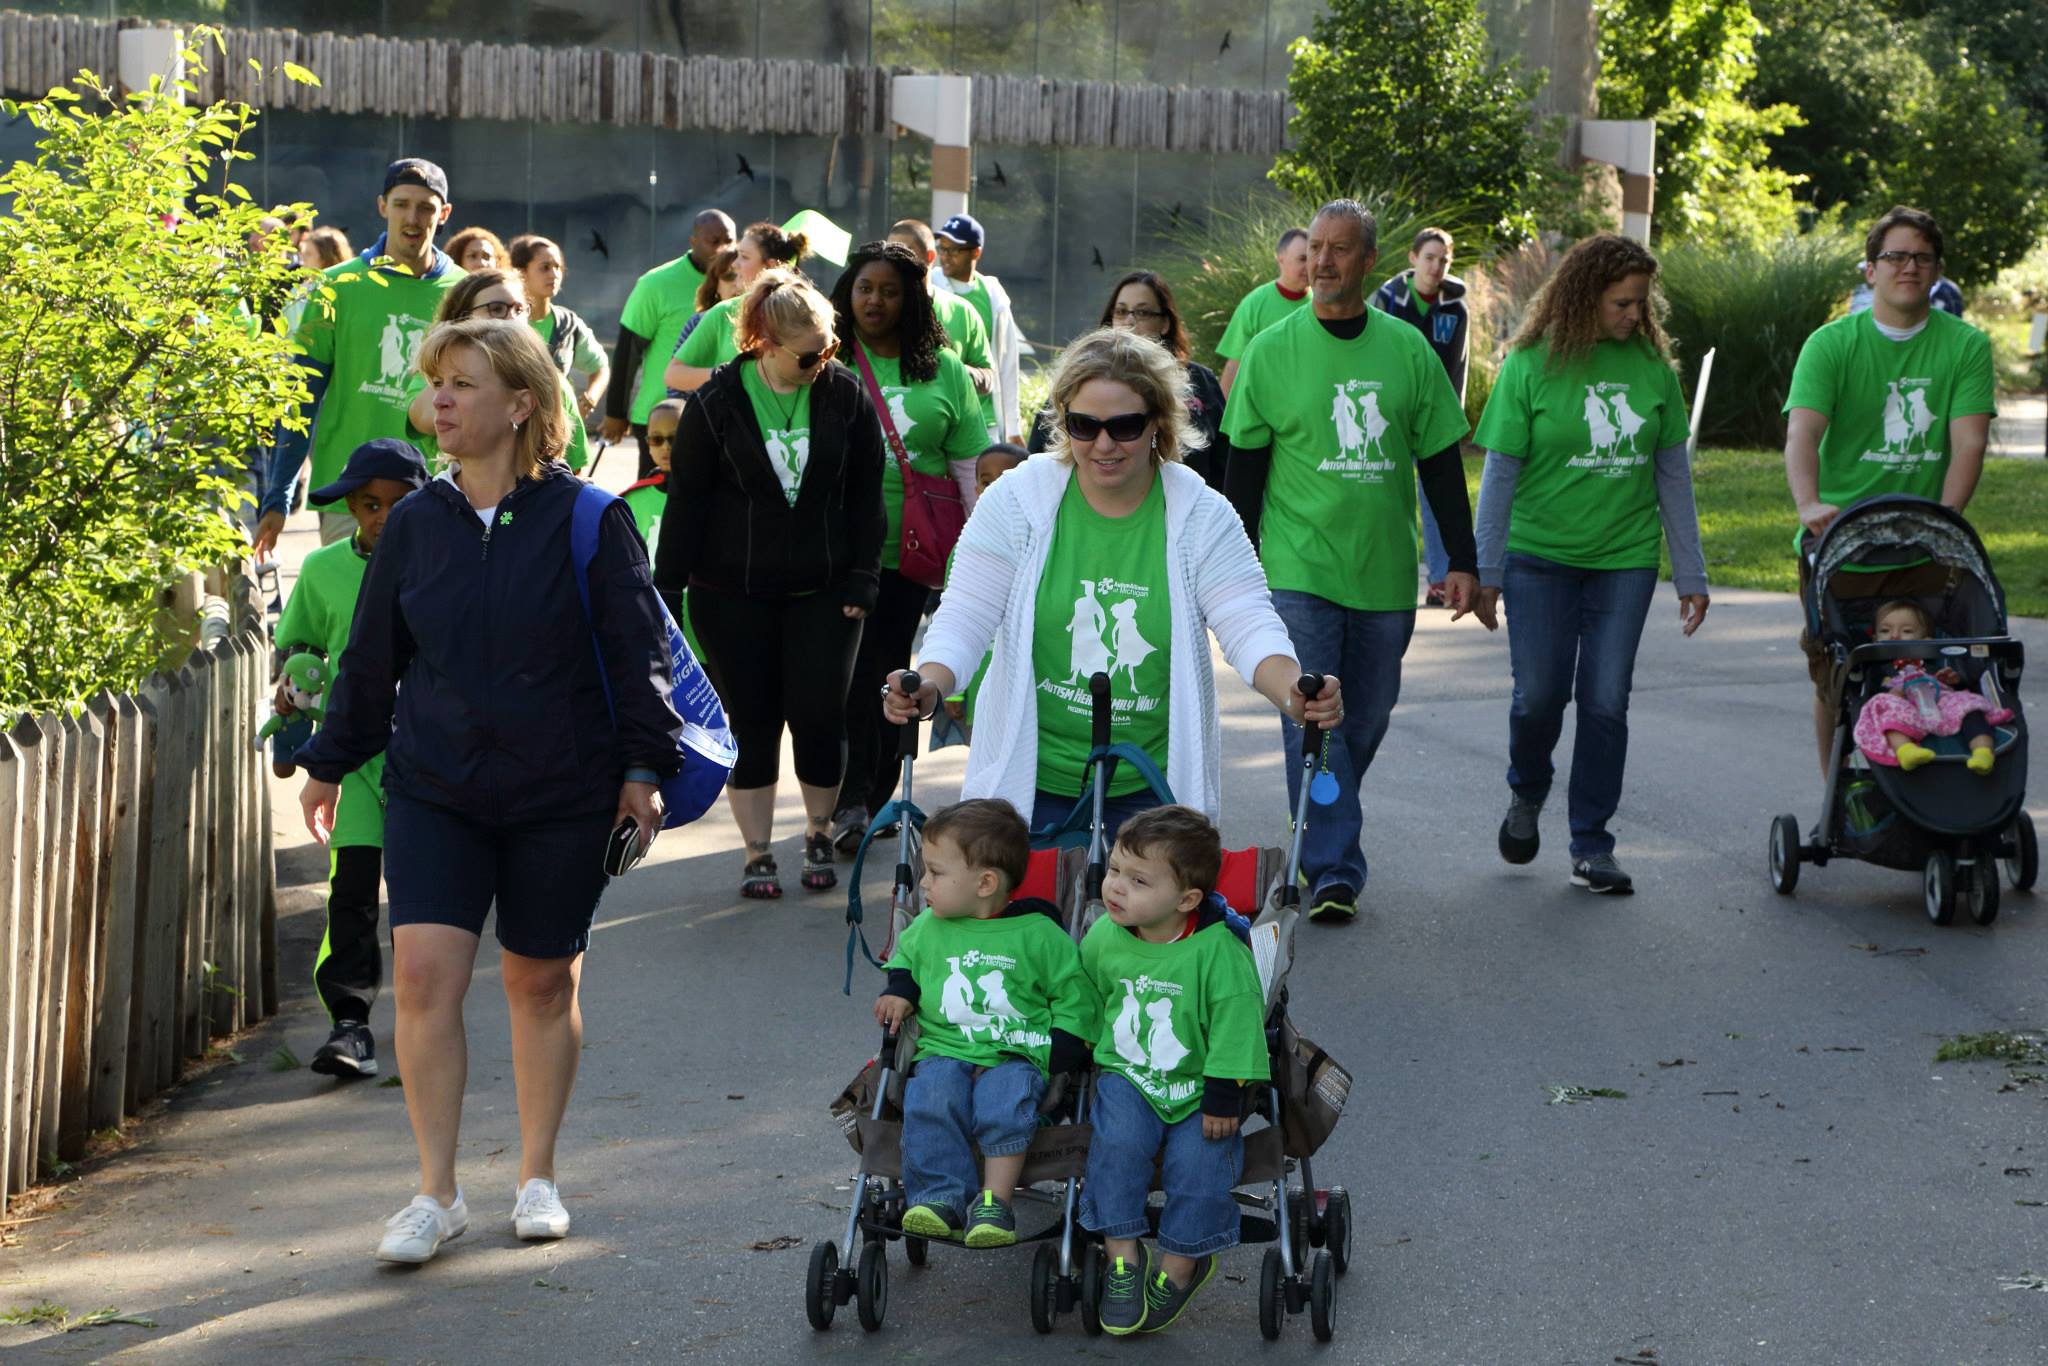 2nd Annual Autism Hero Family Walk Held July 31st Celebrates Michigan's Autism Heroes